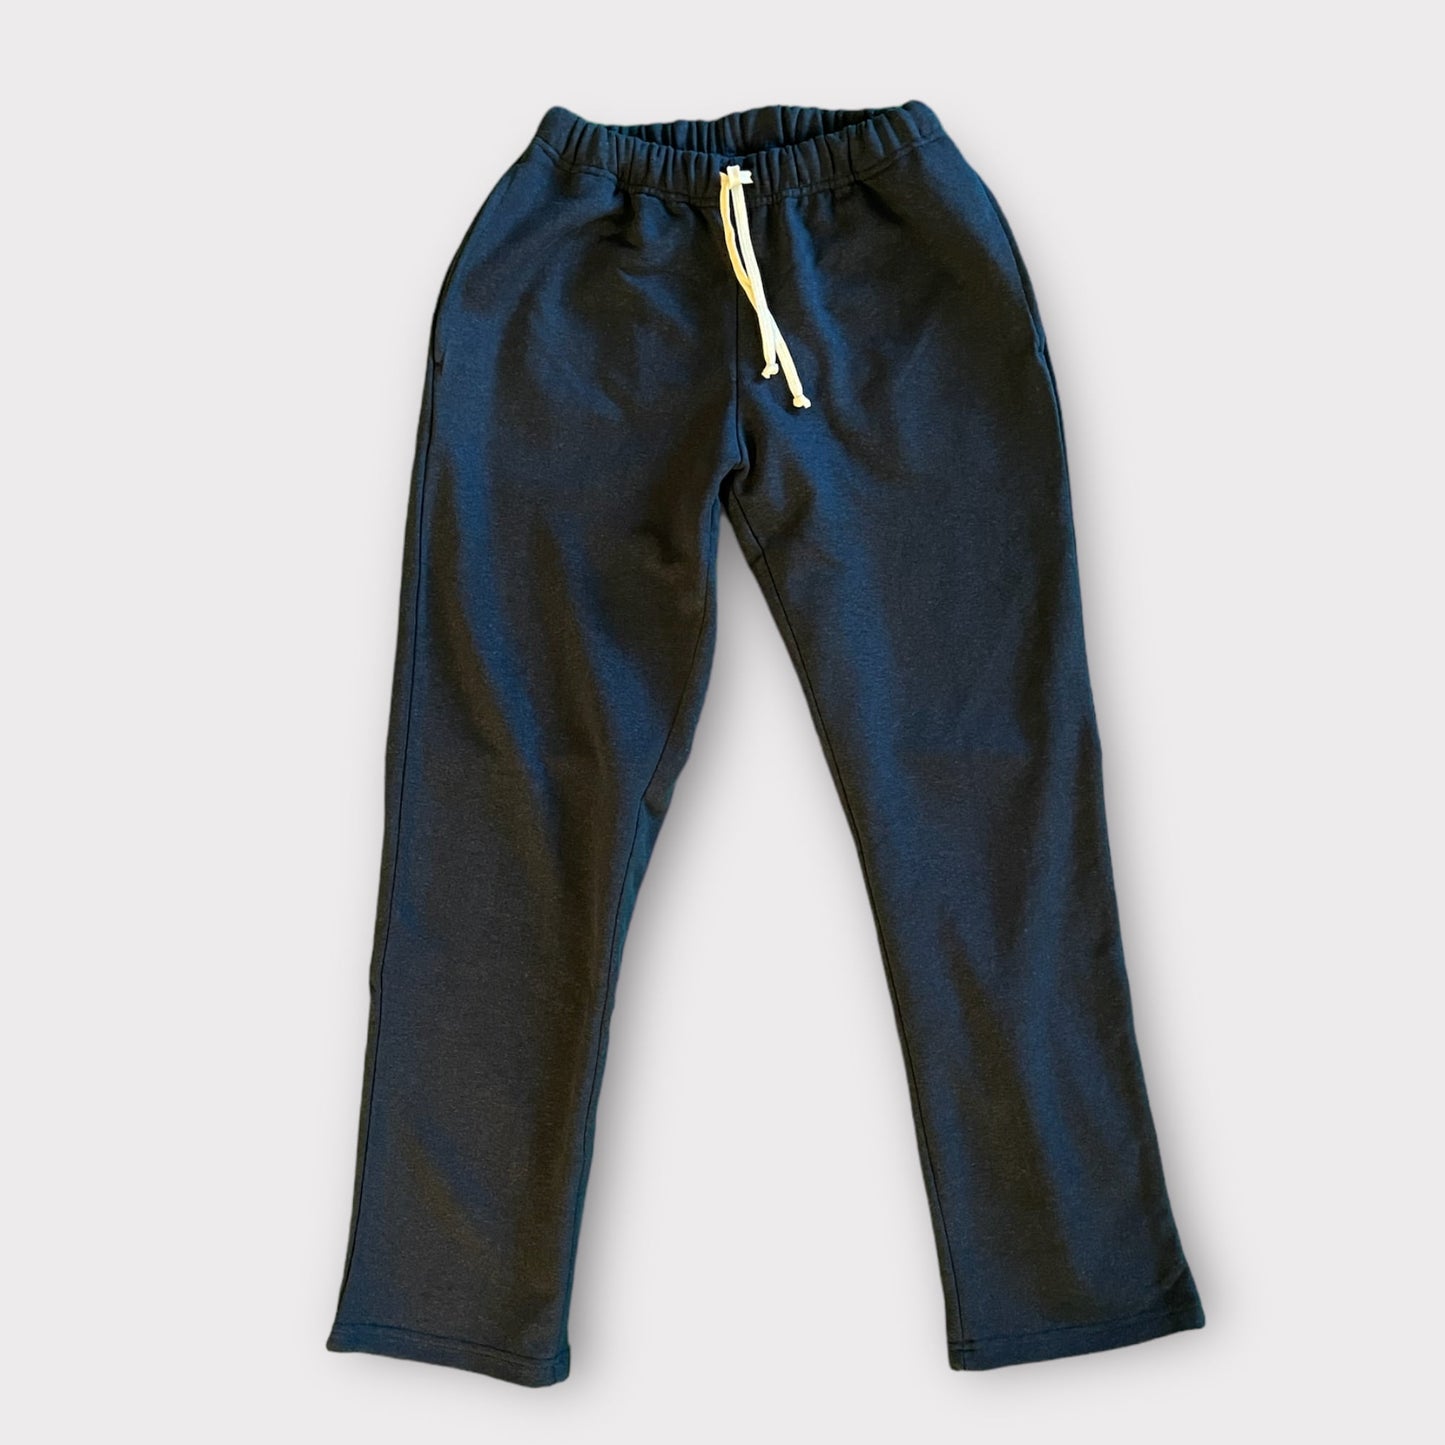 Hemp French Terry Sweatpants by Asatre